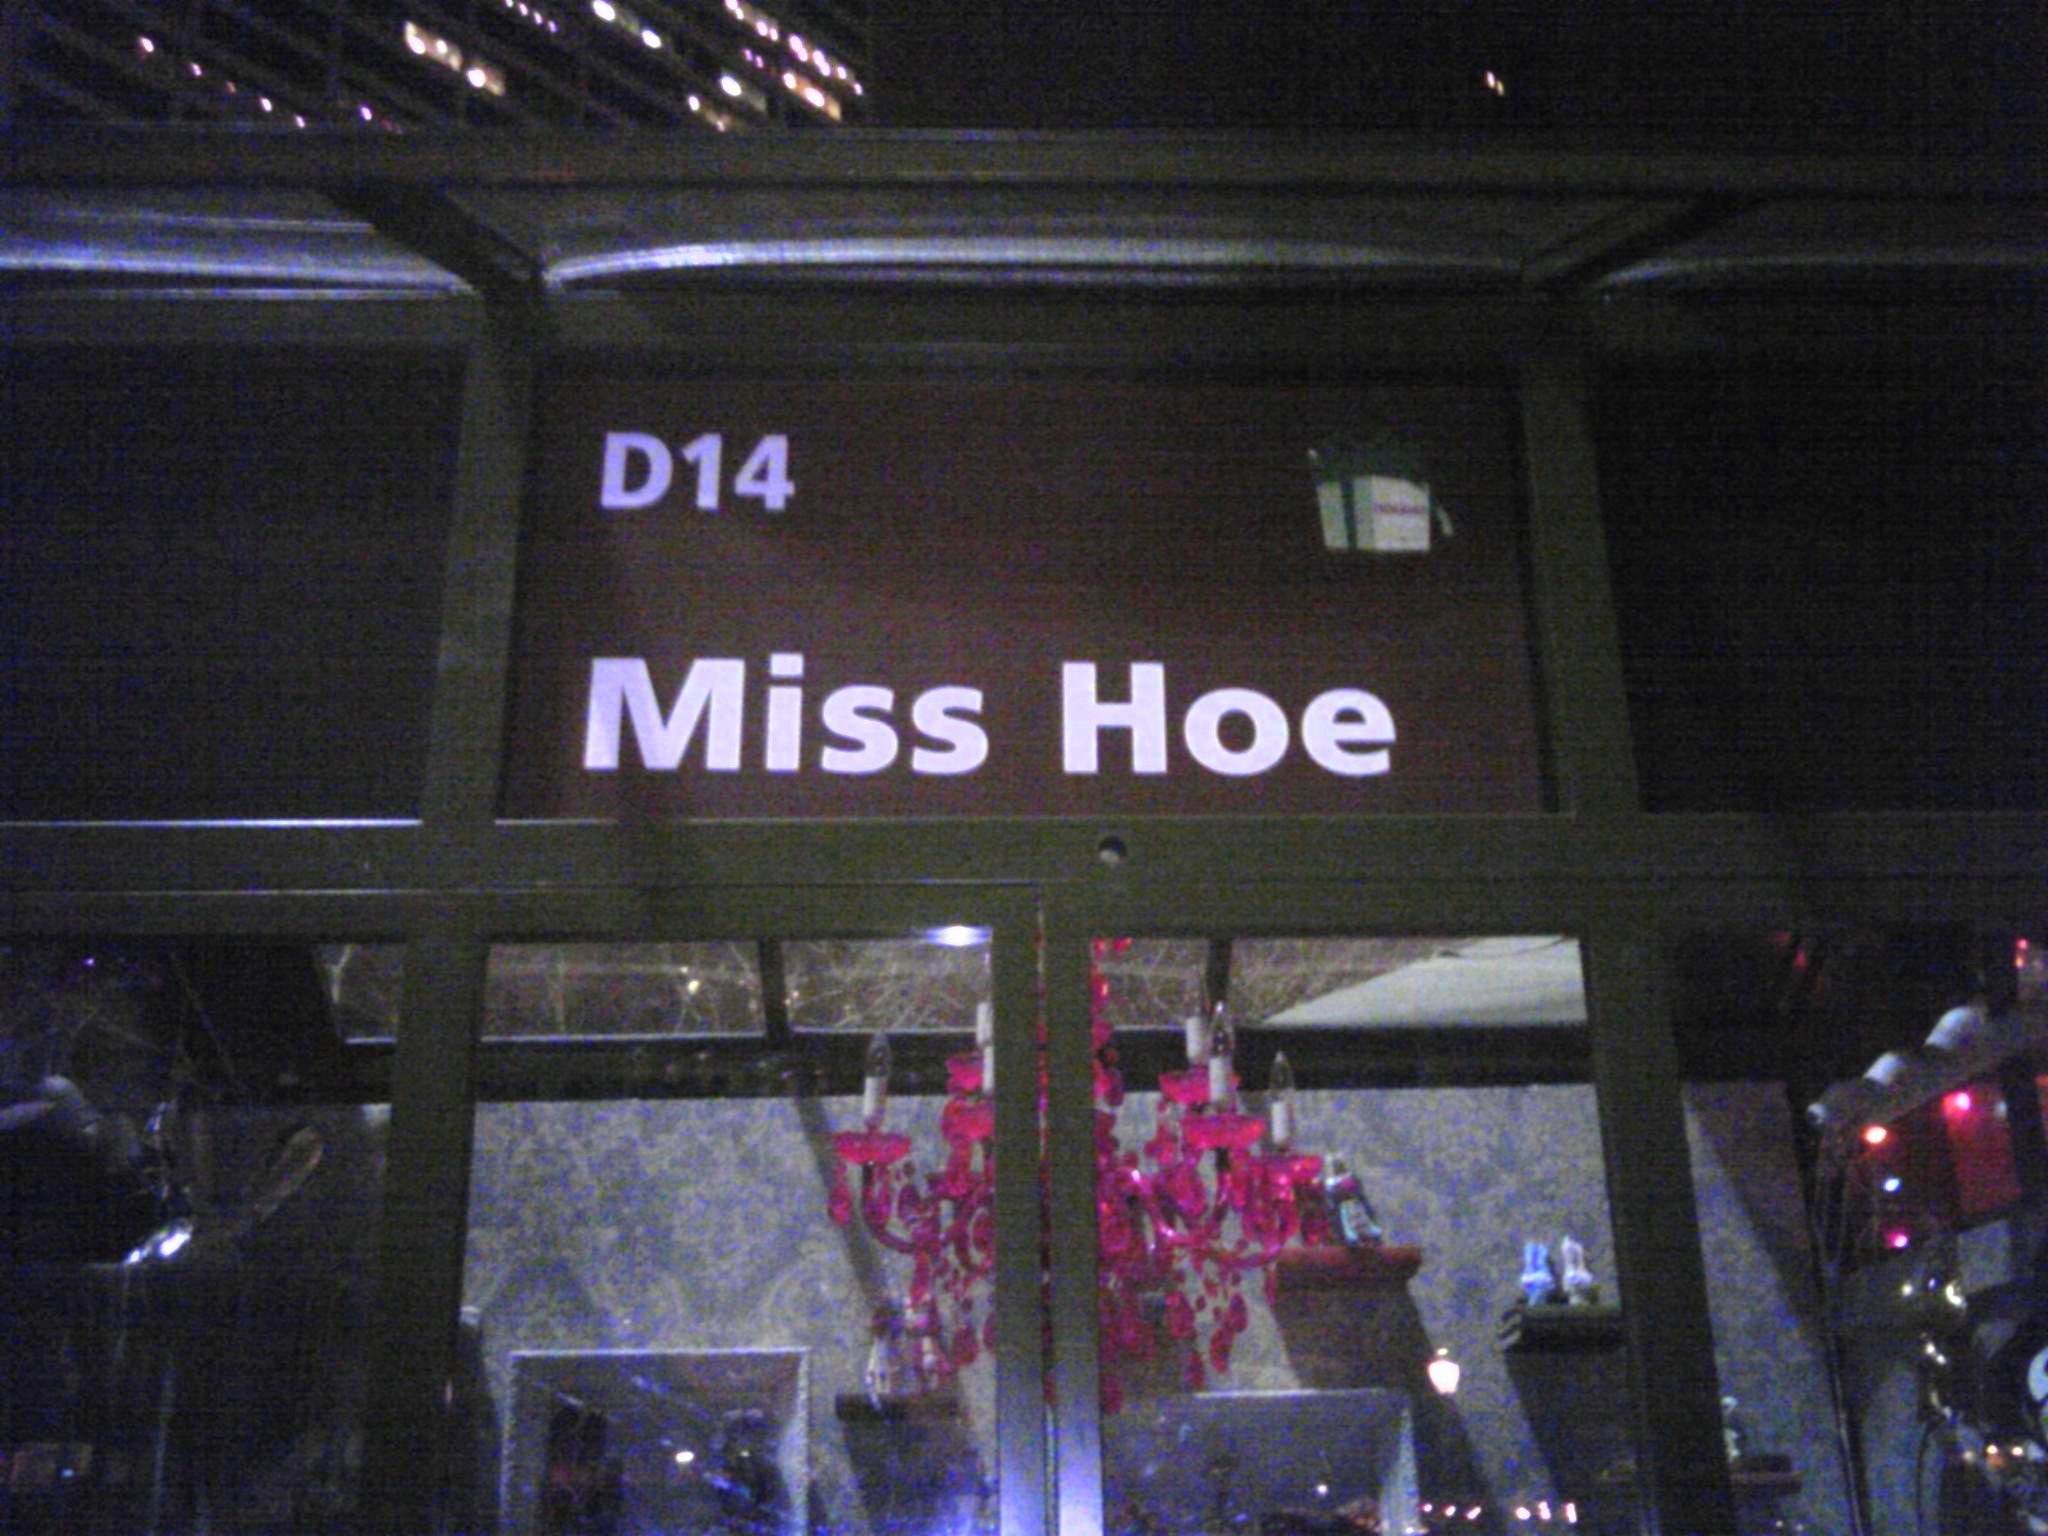 small store sign in NYC bryant park. miss hoe?? hmm